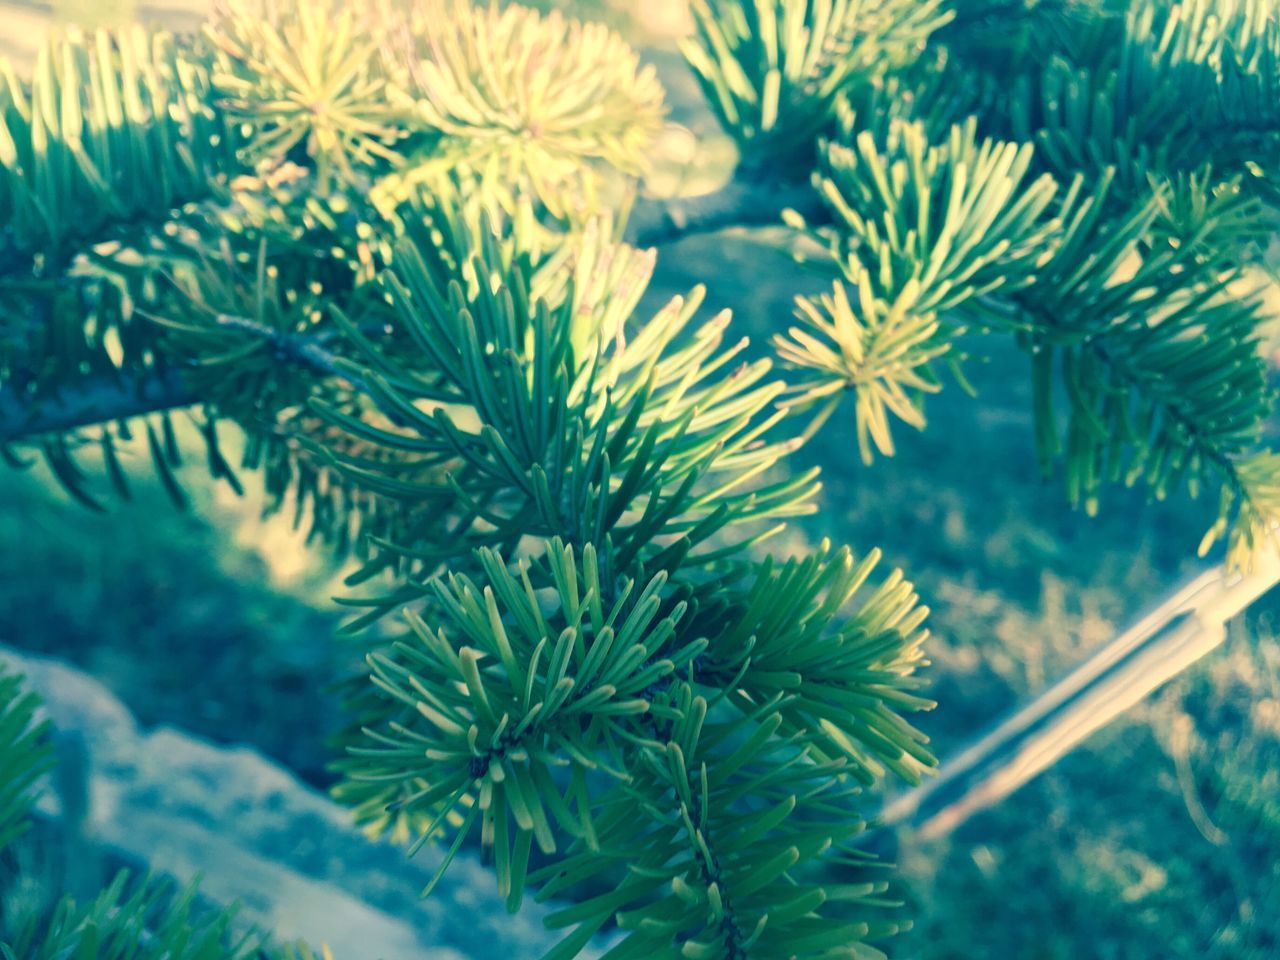 growth, plant, green color, nature, close-up, leaf, beauty in nature, selective focus, focus on foreground, branch, water, green, freshness, tranquility, day, scenics, outdoors, coniferous tree, pine tree, fragility, frond, no people, growing, needle - plant part, spruce tree